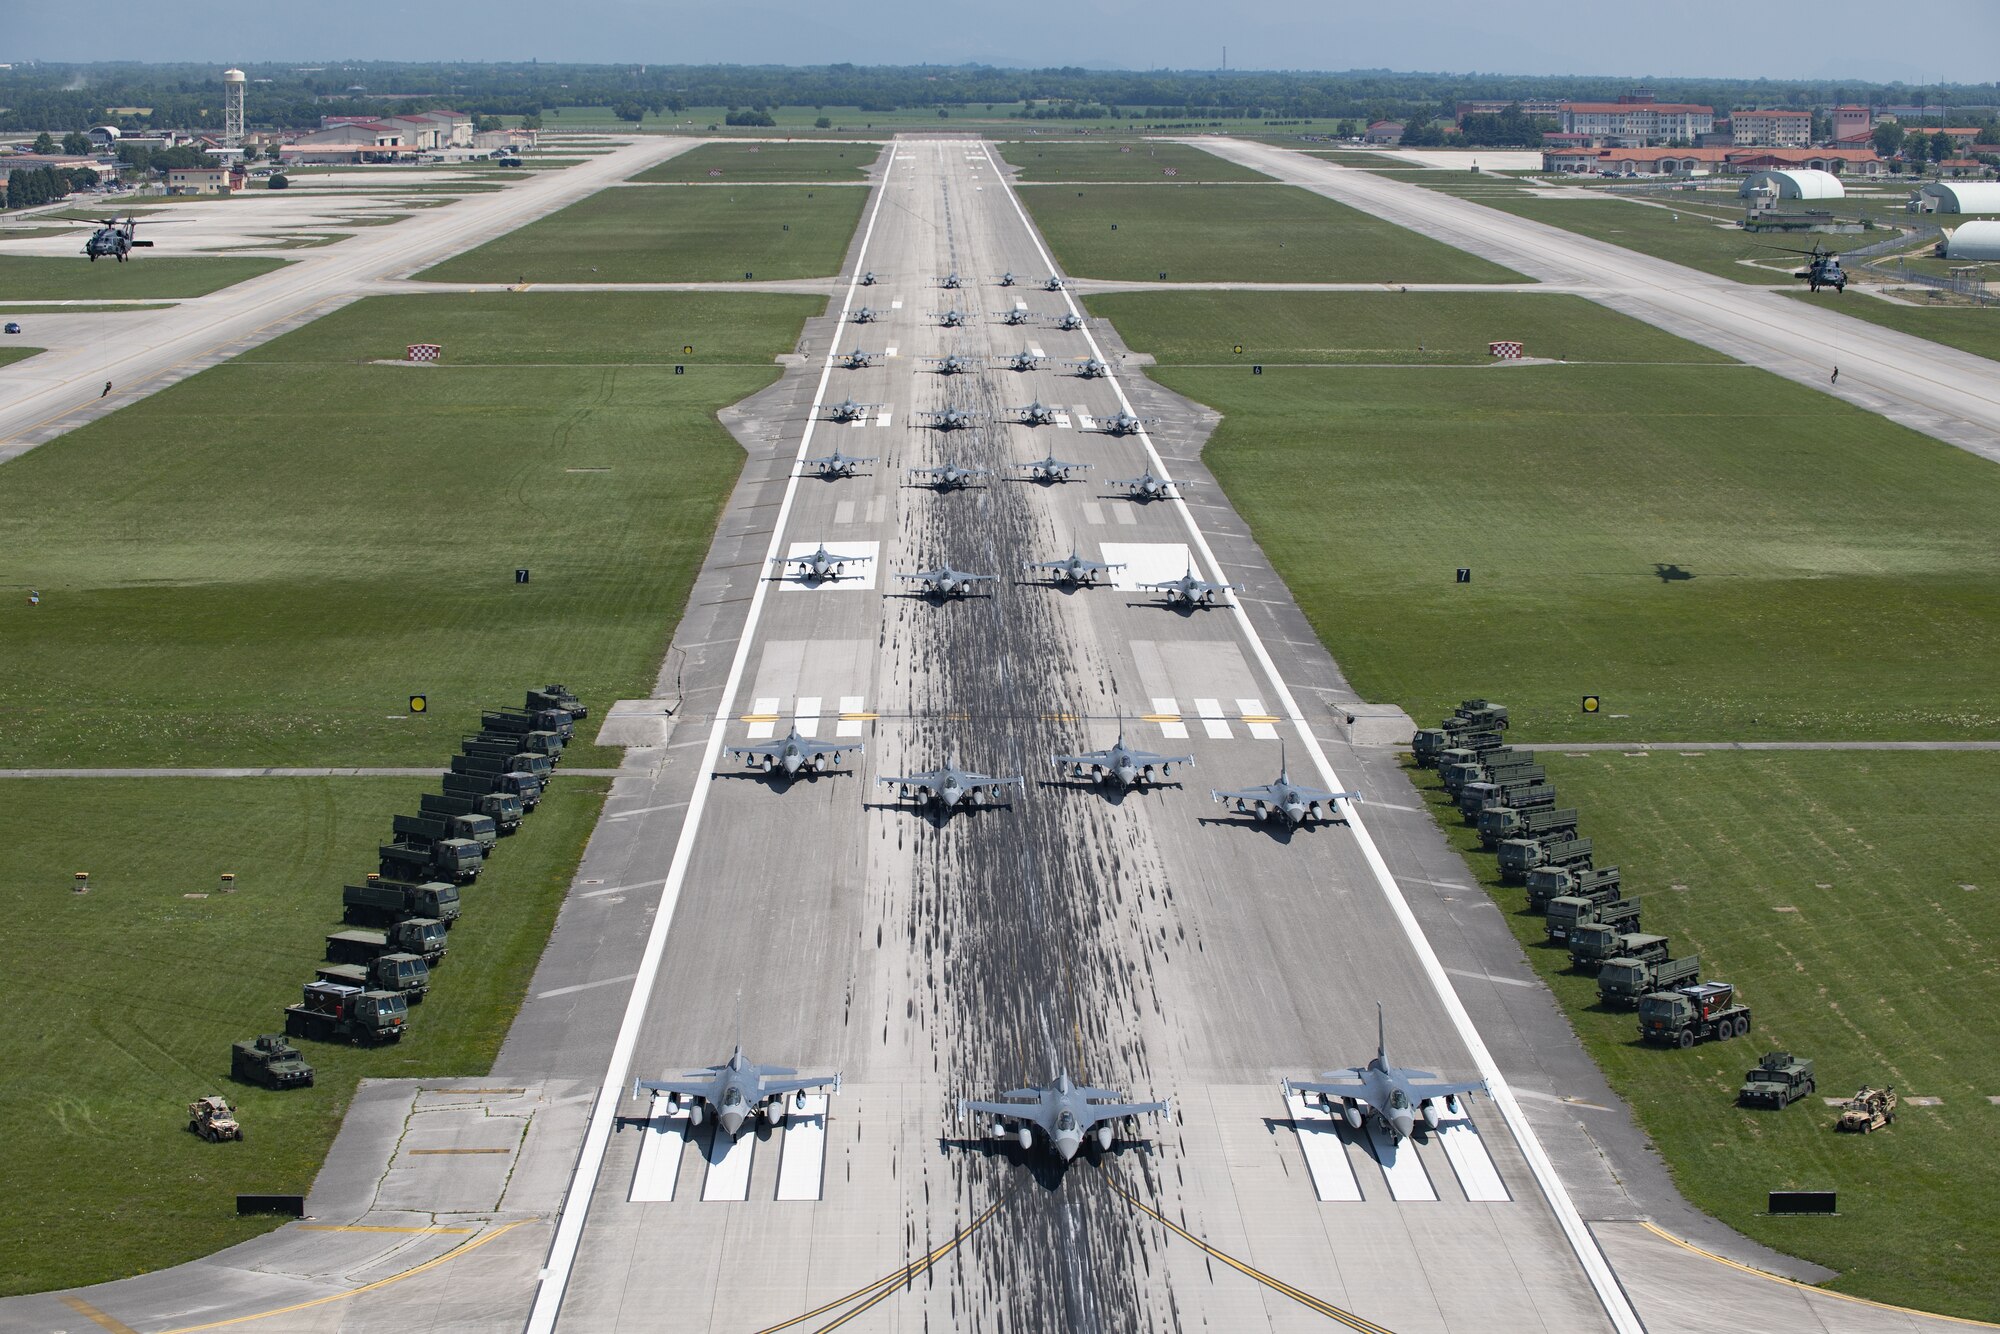 U.S. Air Force aircraft and vehicles assigned to the 31st Fighter Wing line the runway during an elephant walk at Aviano Air Base, Italy, June 1, 2020. Despite the restrictions in place due to COVID-19, the 31st FW remains lethal and combat ready, prepared to deter or defeat any adversary who threatens U.S. or NATO interests. (U.S. Air Force photo by Airman Thomas S. Keisler IV)